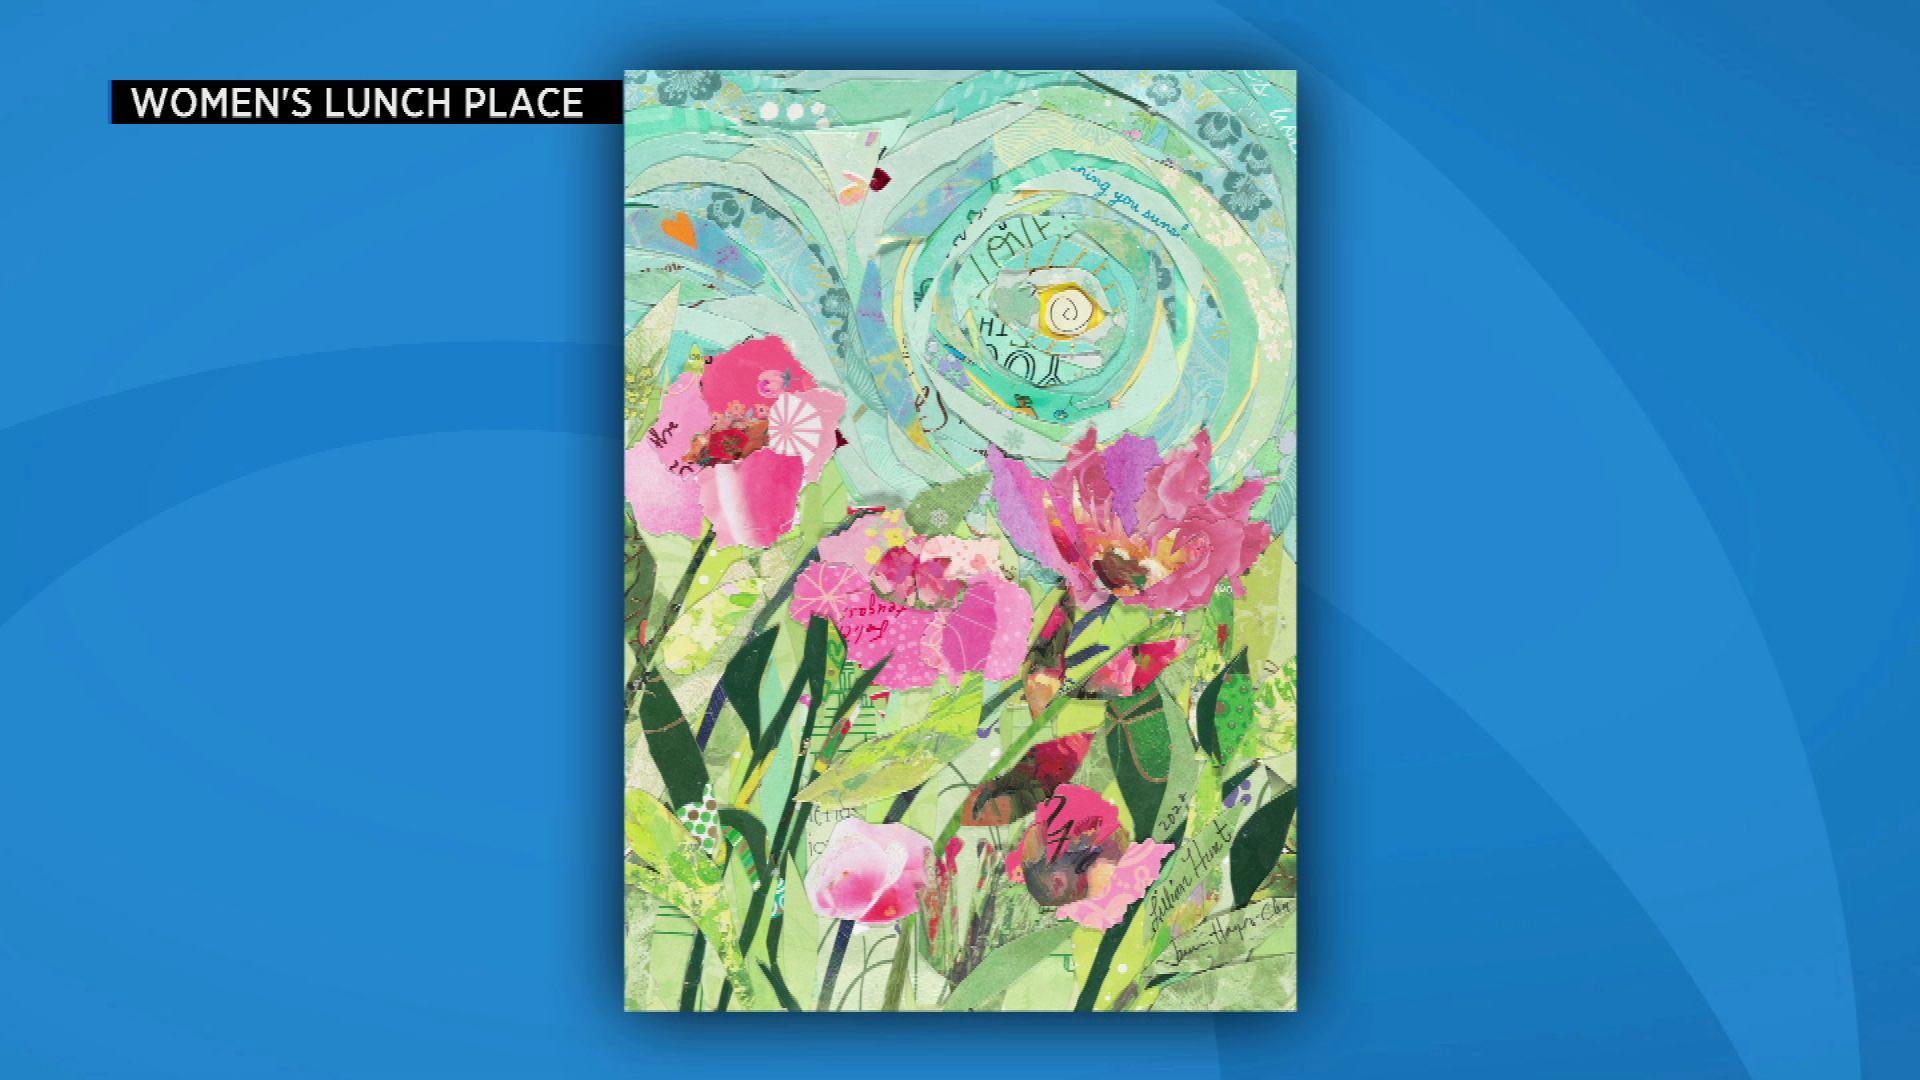 Women’s Lunch Place Selling Special Mother’s Day Cards To Raise Critical Money For Shelter